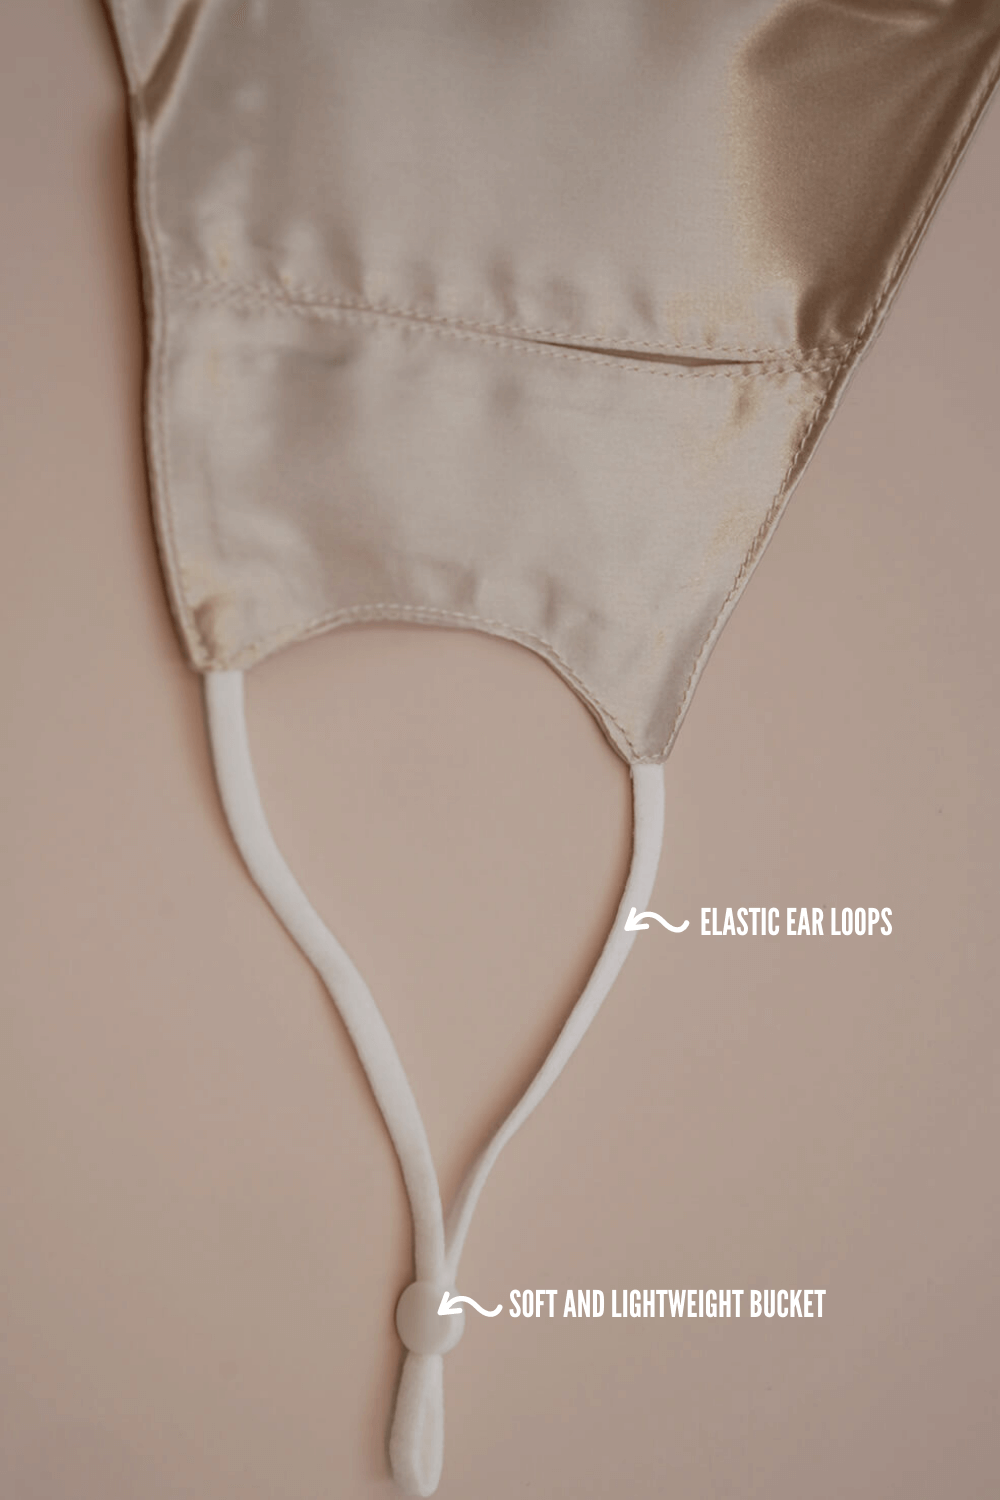 STELLAR Silk Face Mask - Pearl White (with Nose Wire and Filter Pocket) - BASK™